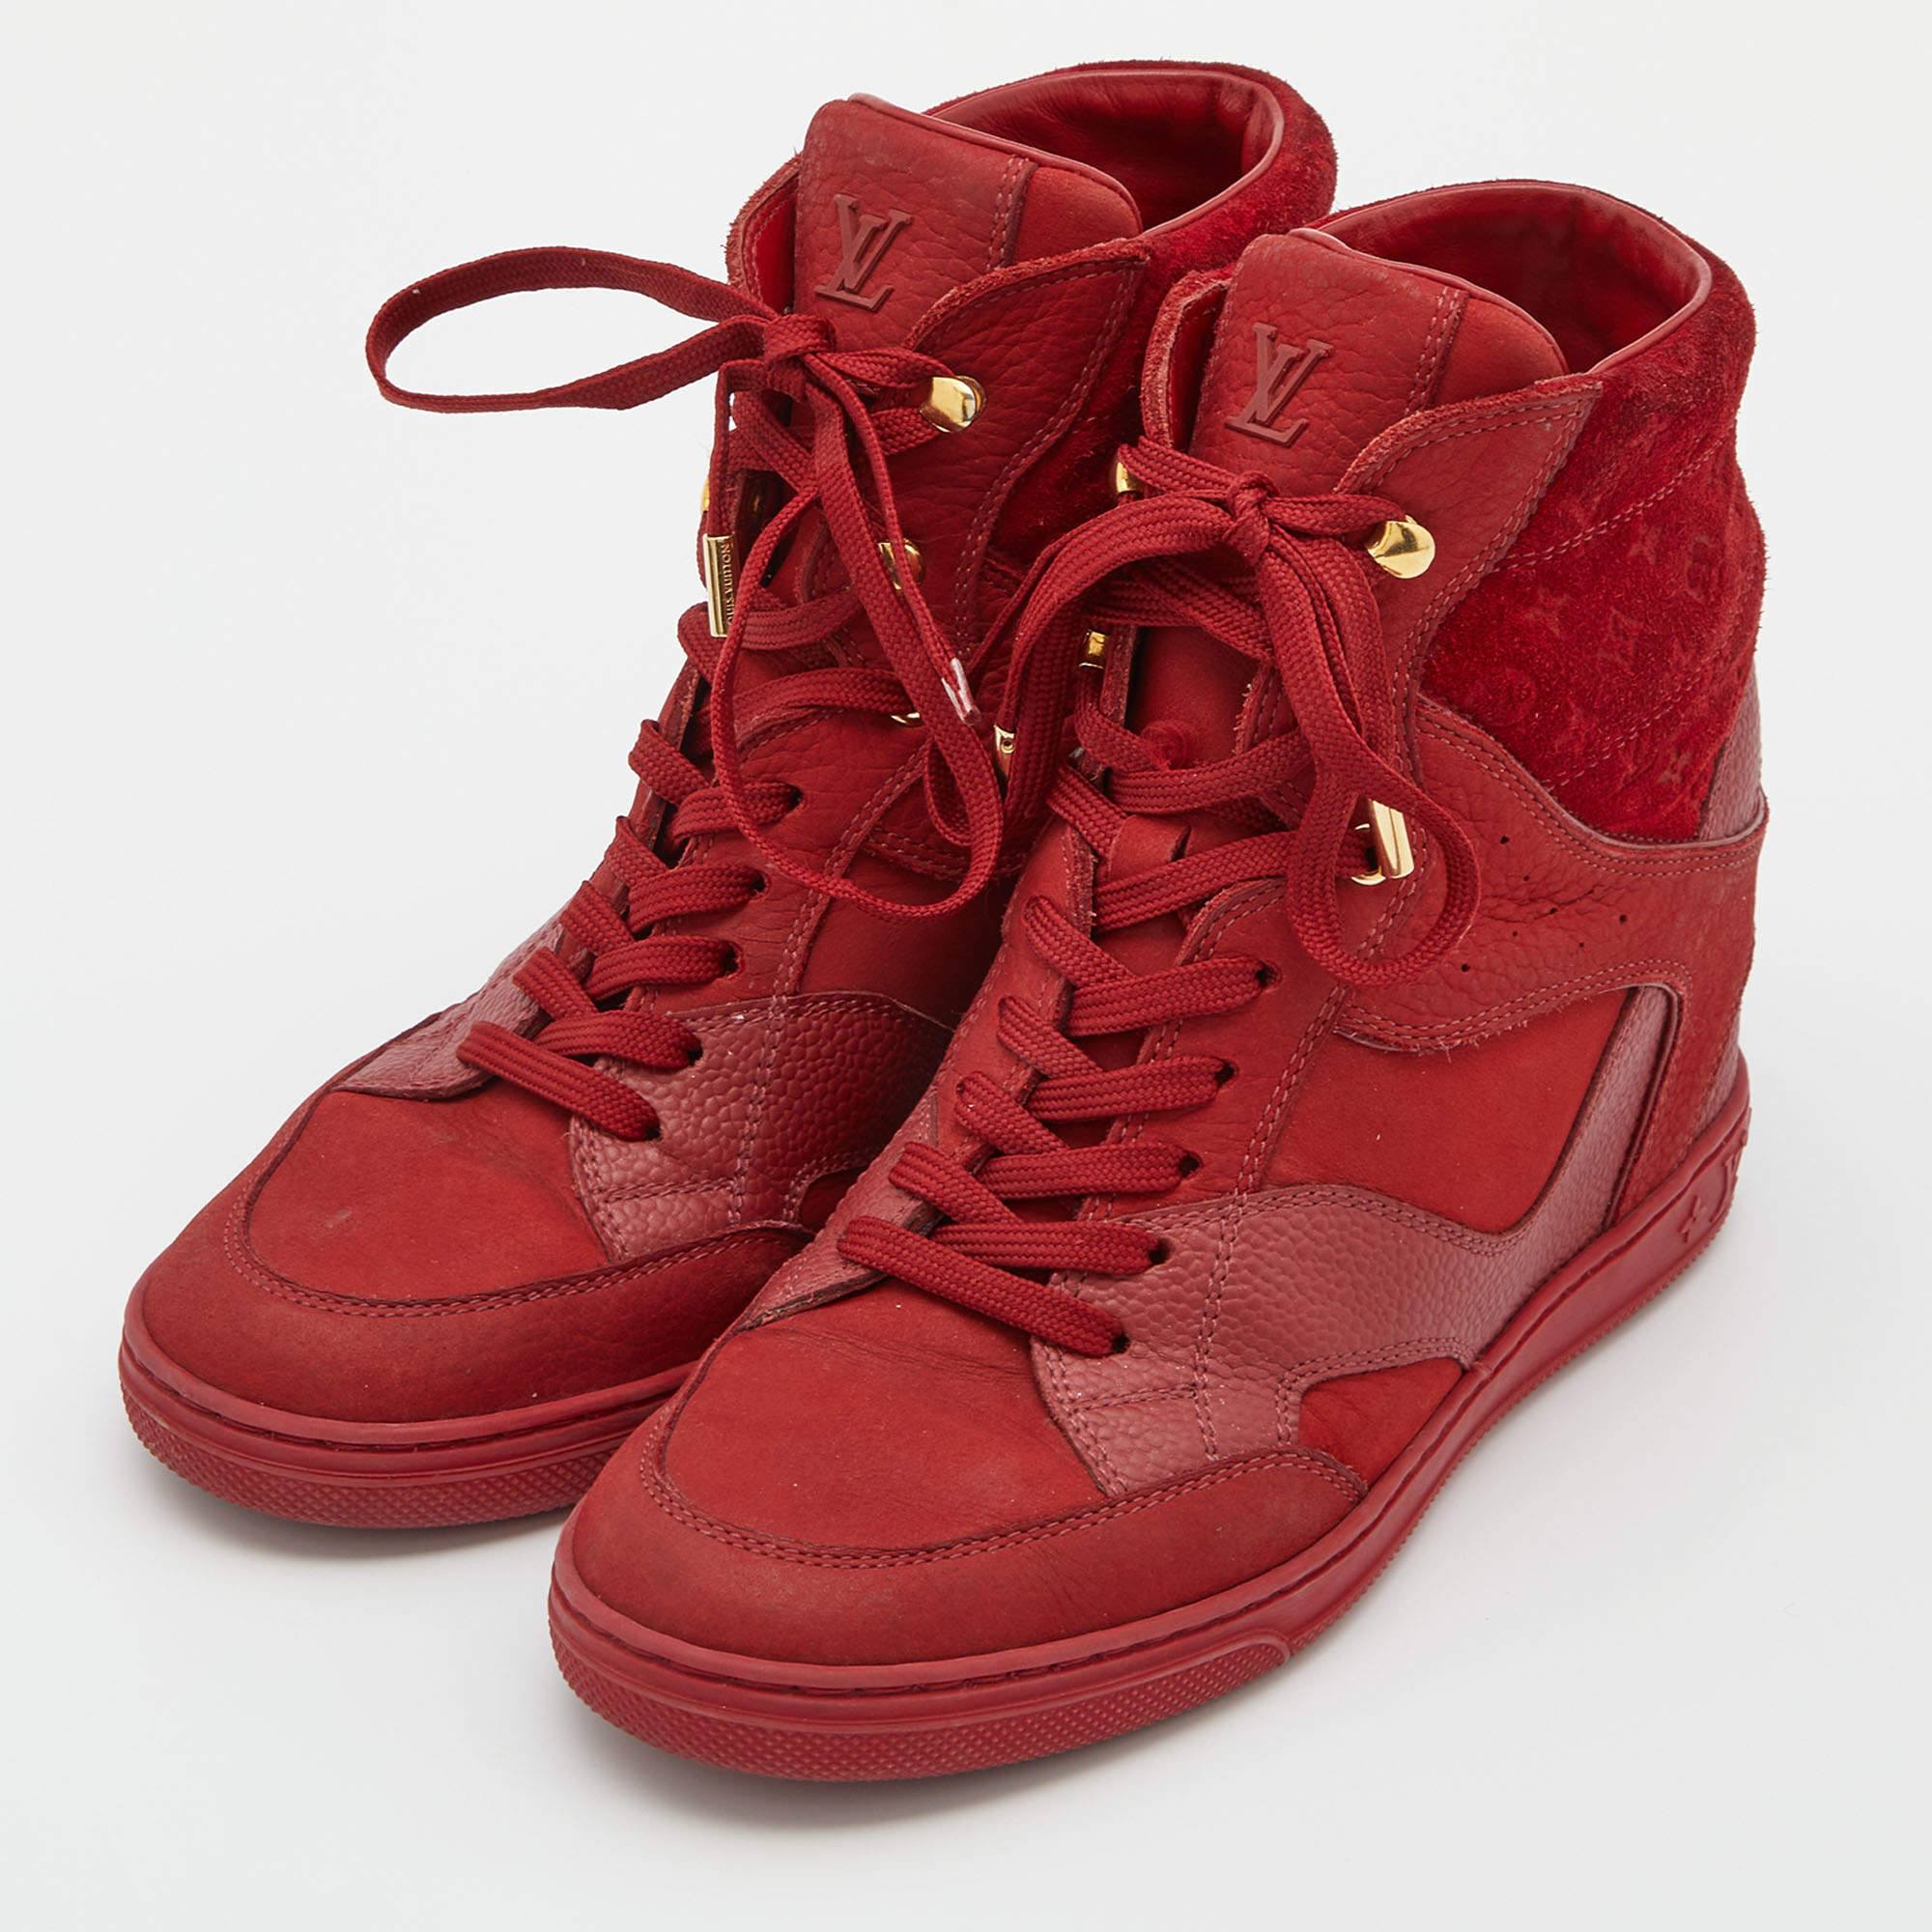 Louis Vuitton Monogram Sneakers Red in Osu - Shoes, The Sneaker